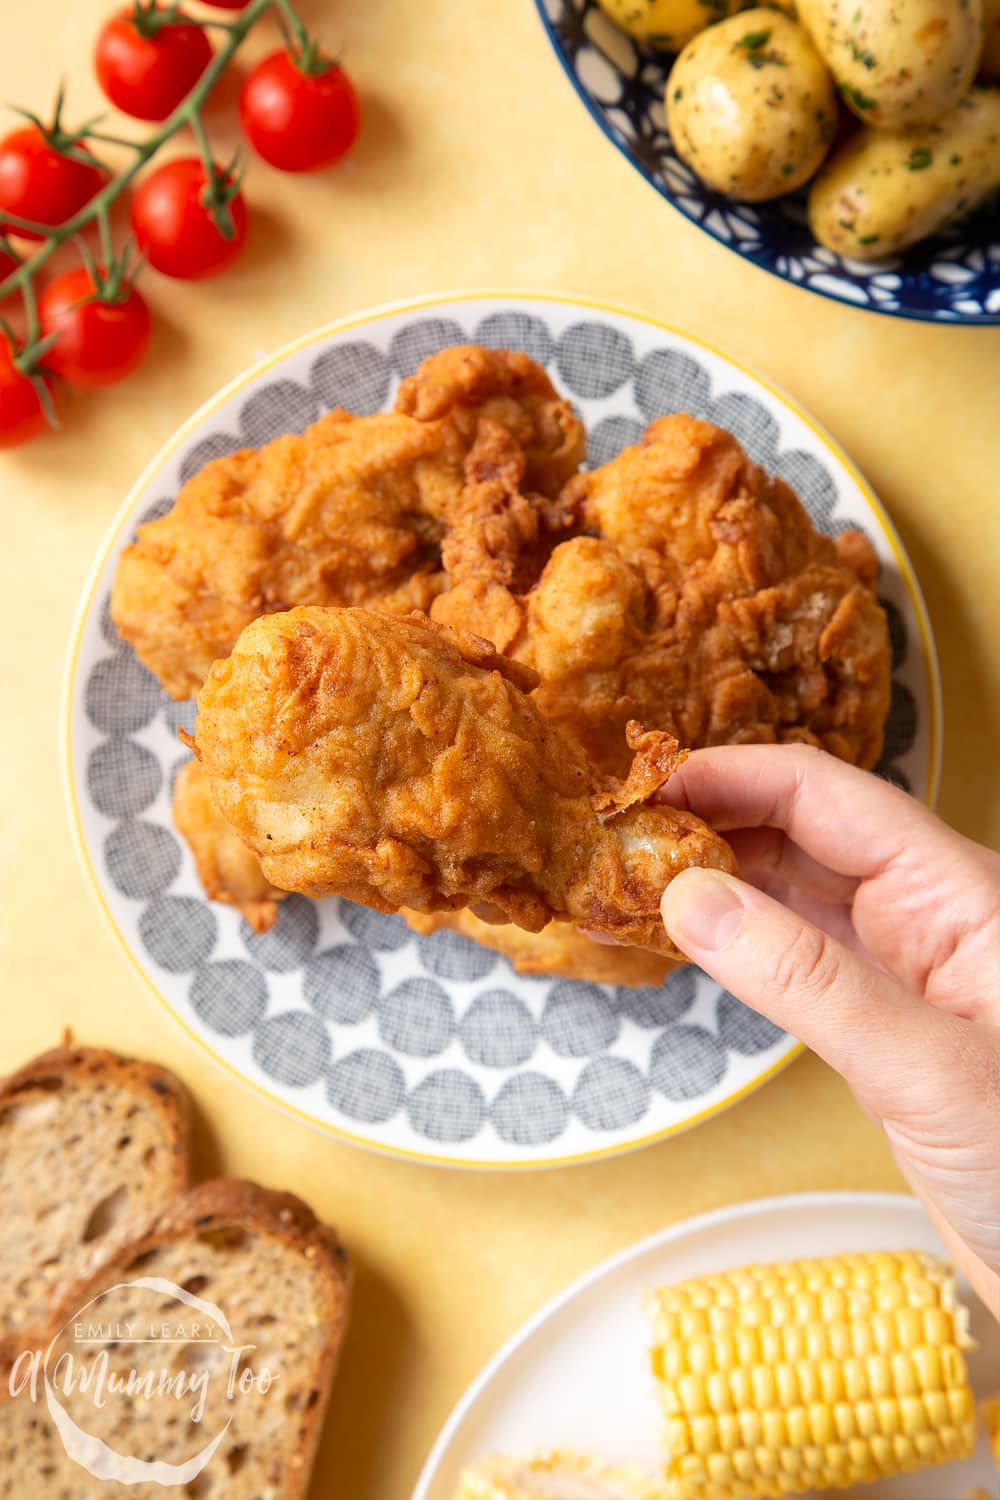 Gordon Ramsay’s buttermilk fried chicken arranged on a plate, surrounded by tomatoes, potatoes, bread and corn on the cob. A hand holds a well-coated drumstick, thickly coated with a seasoned, fried batter.